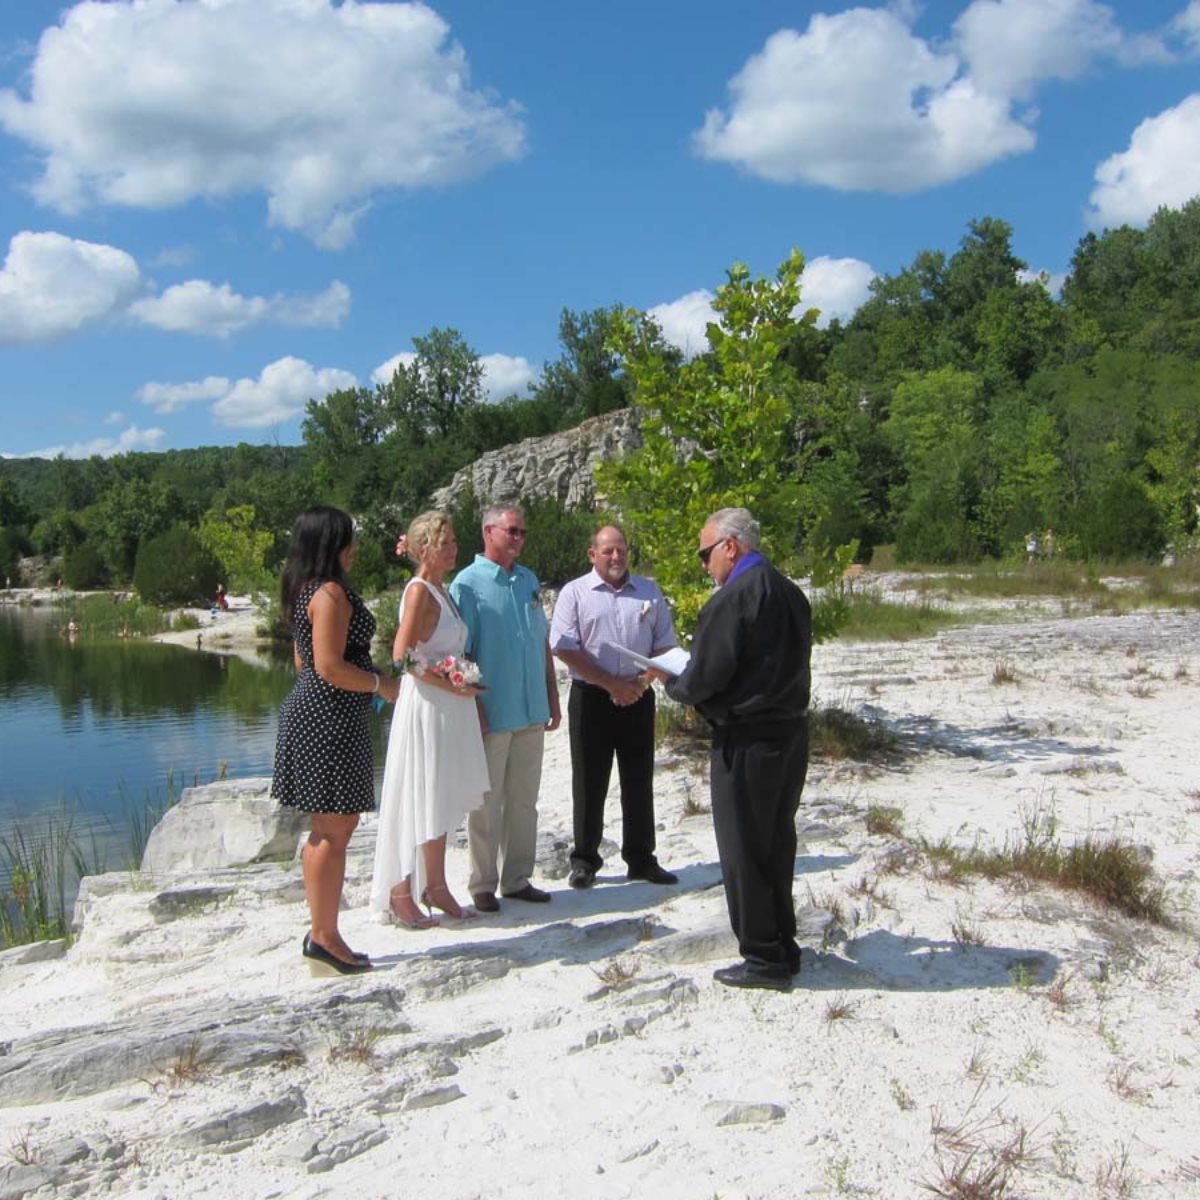 Small wedding ceremony in front of lake